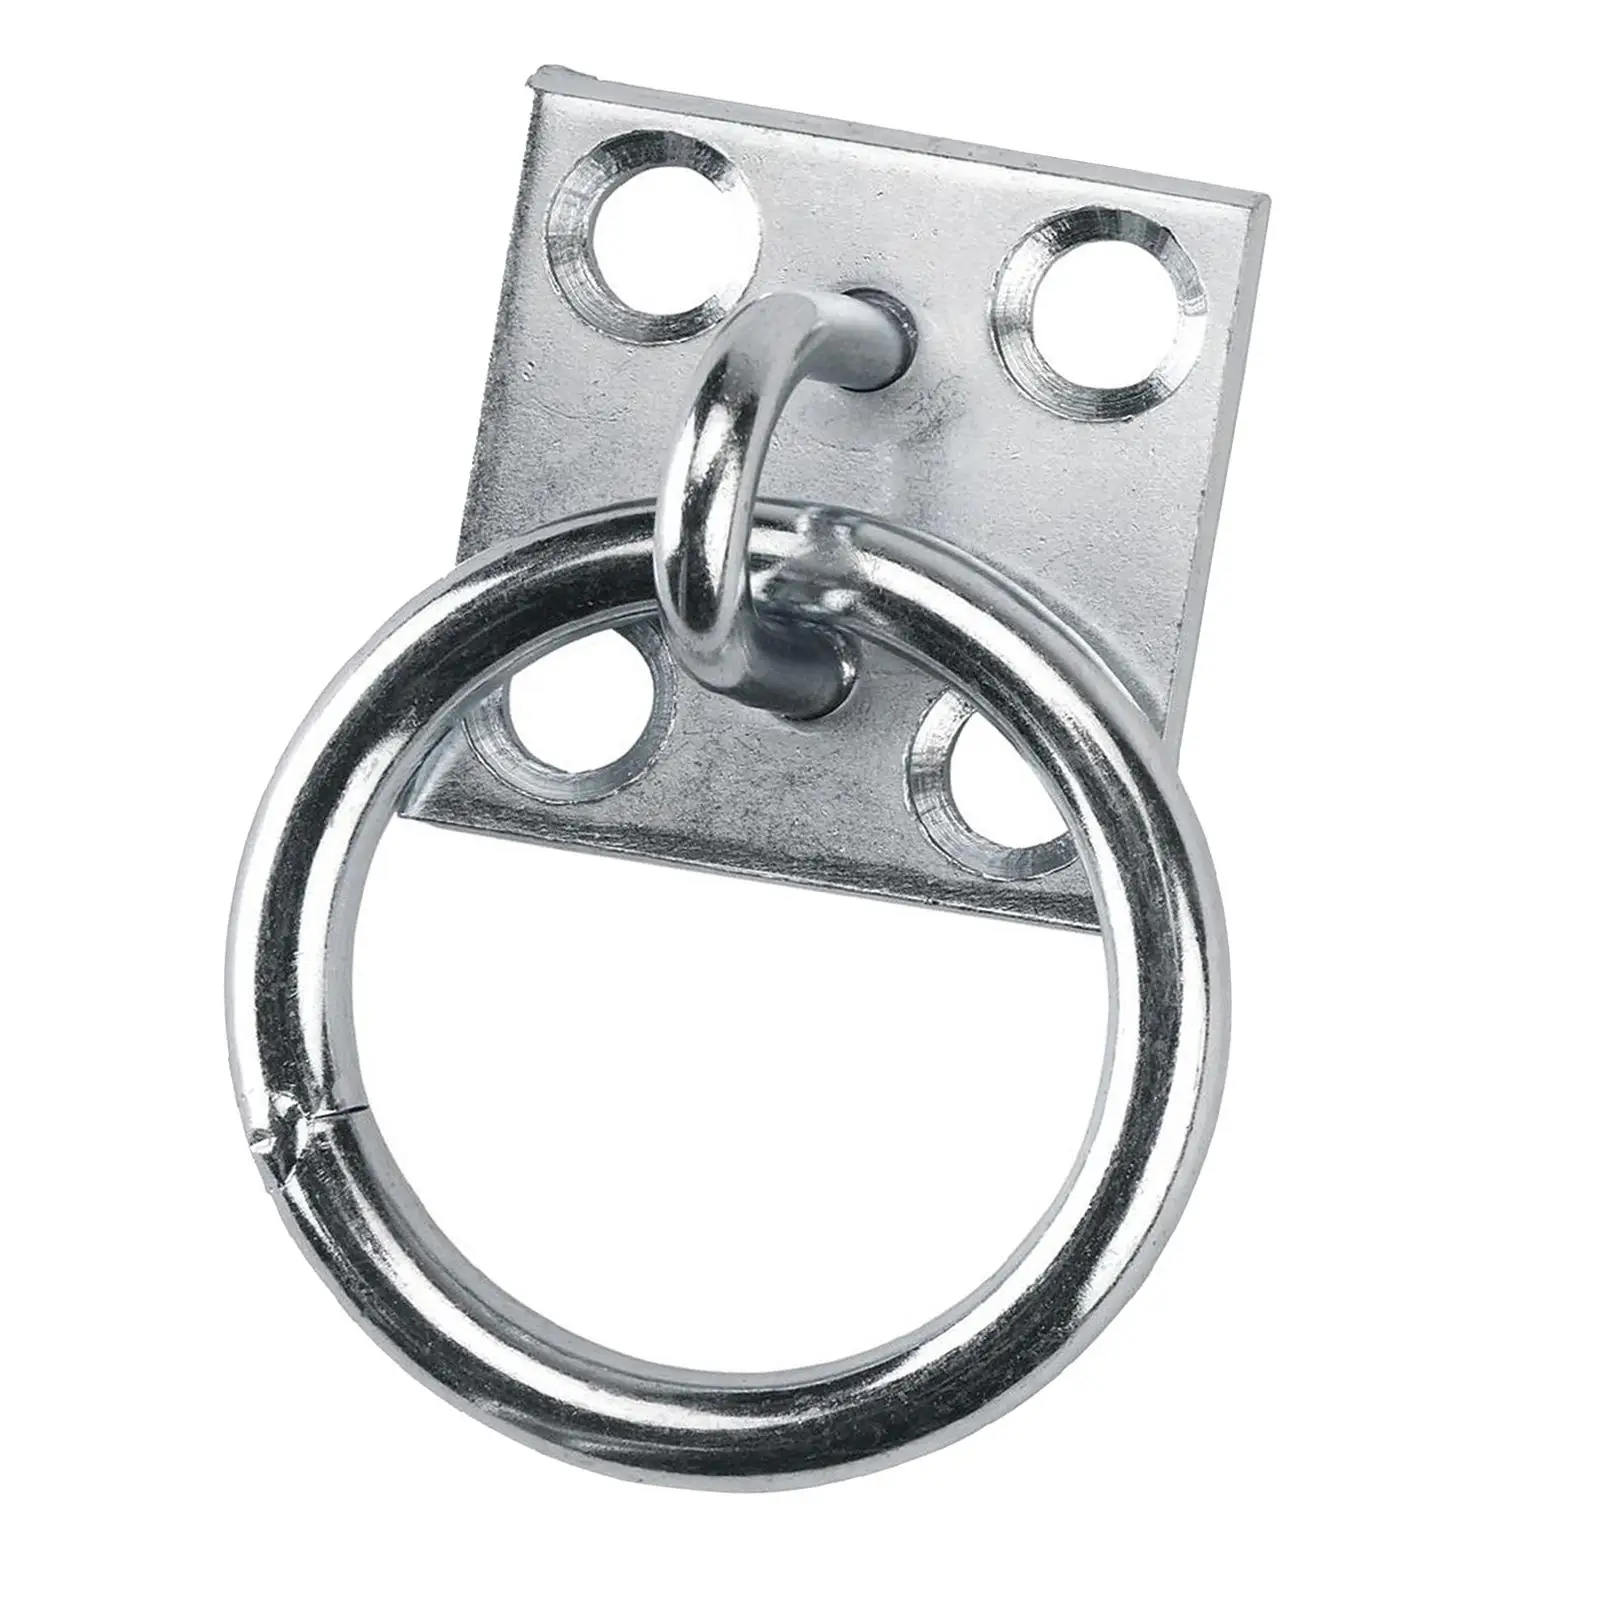 Ring Plate Horse Stable Tool Tying Horses Iron Nickel Plated Tie up Tether for Dog Lashing Equestrian Animal Accessories